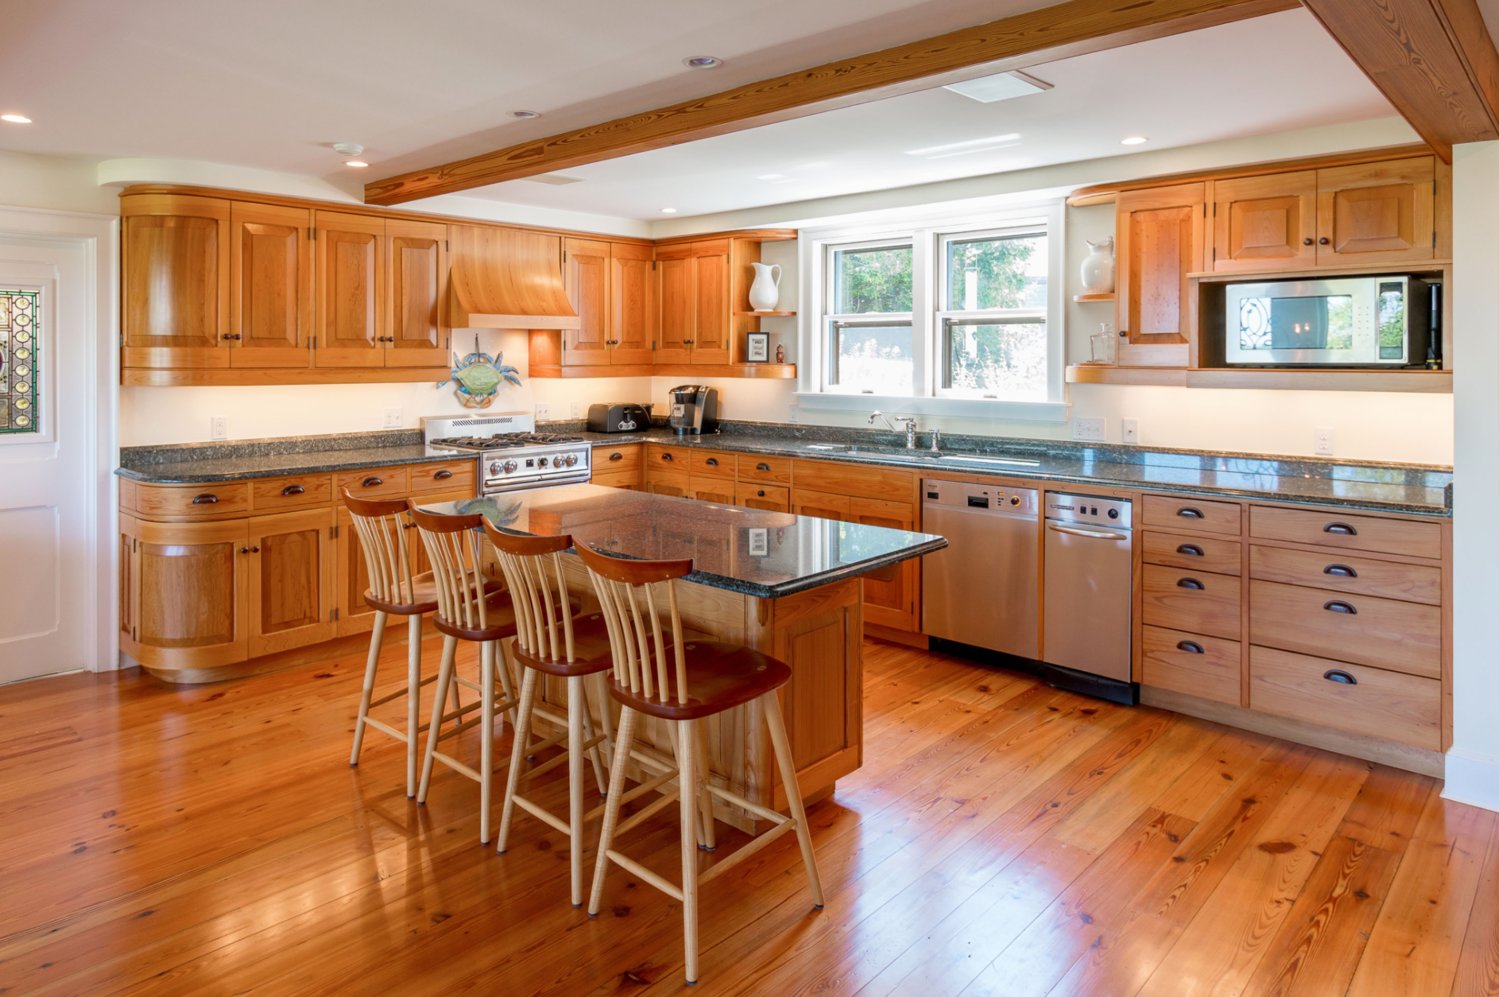 The kitchen has wood floors, an exposed-beam ceiling, a stone-topped center island and counters, and high-end appliances by Viking, Sub-Zero and Miele.